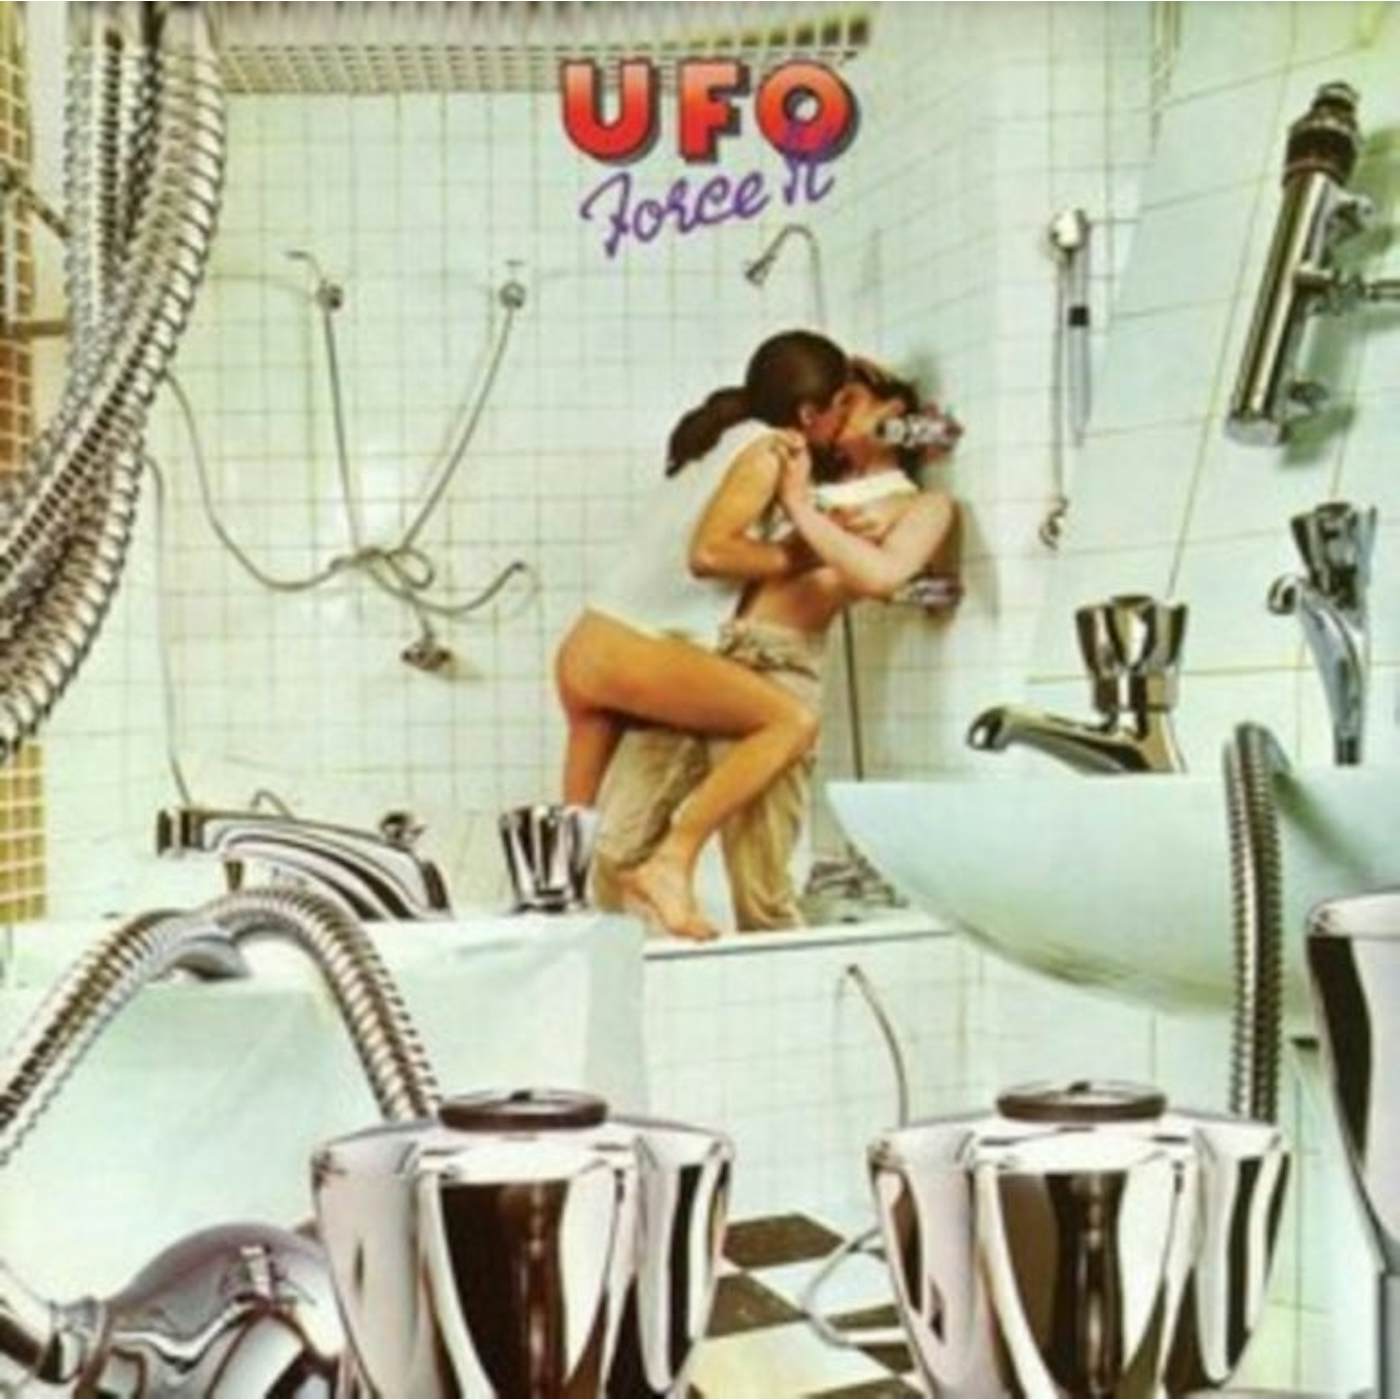 UFO LP Vinyl Record - Force It (Deluxe Edition)